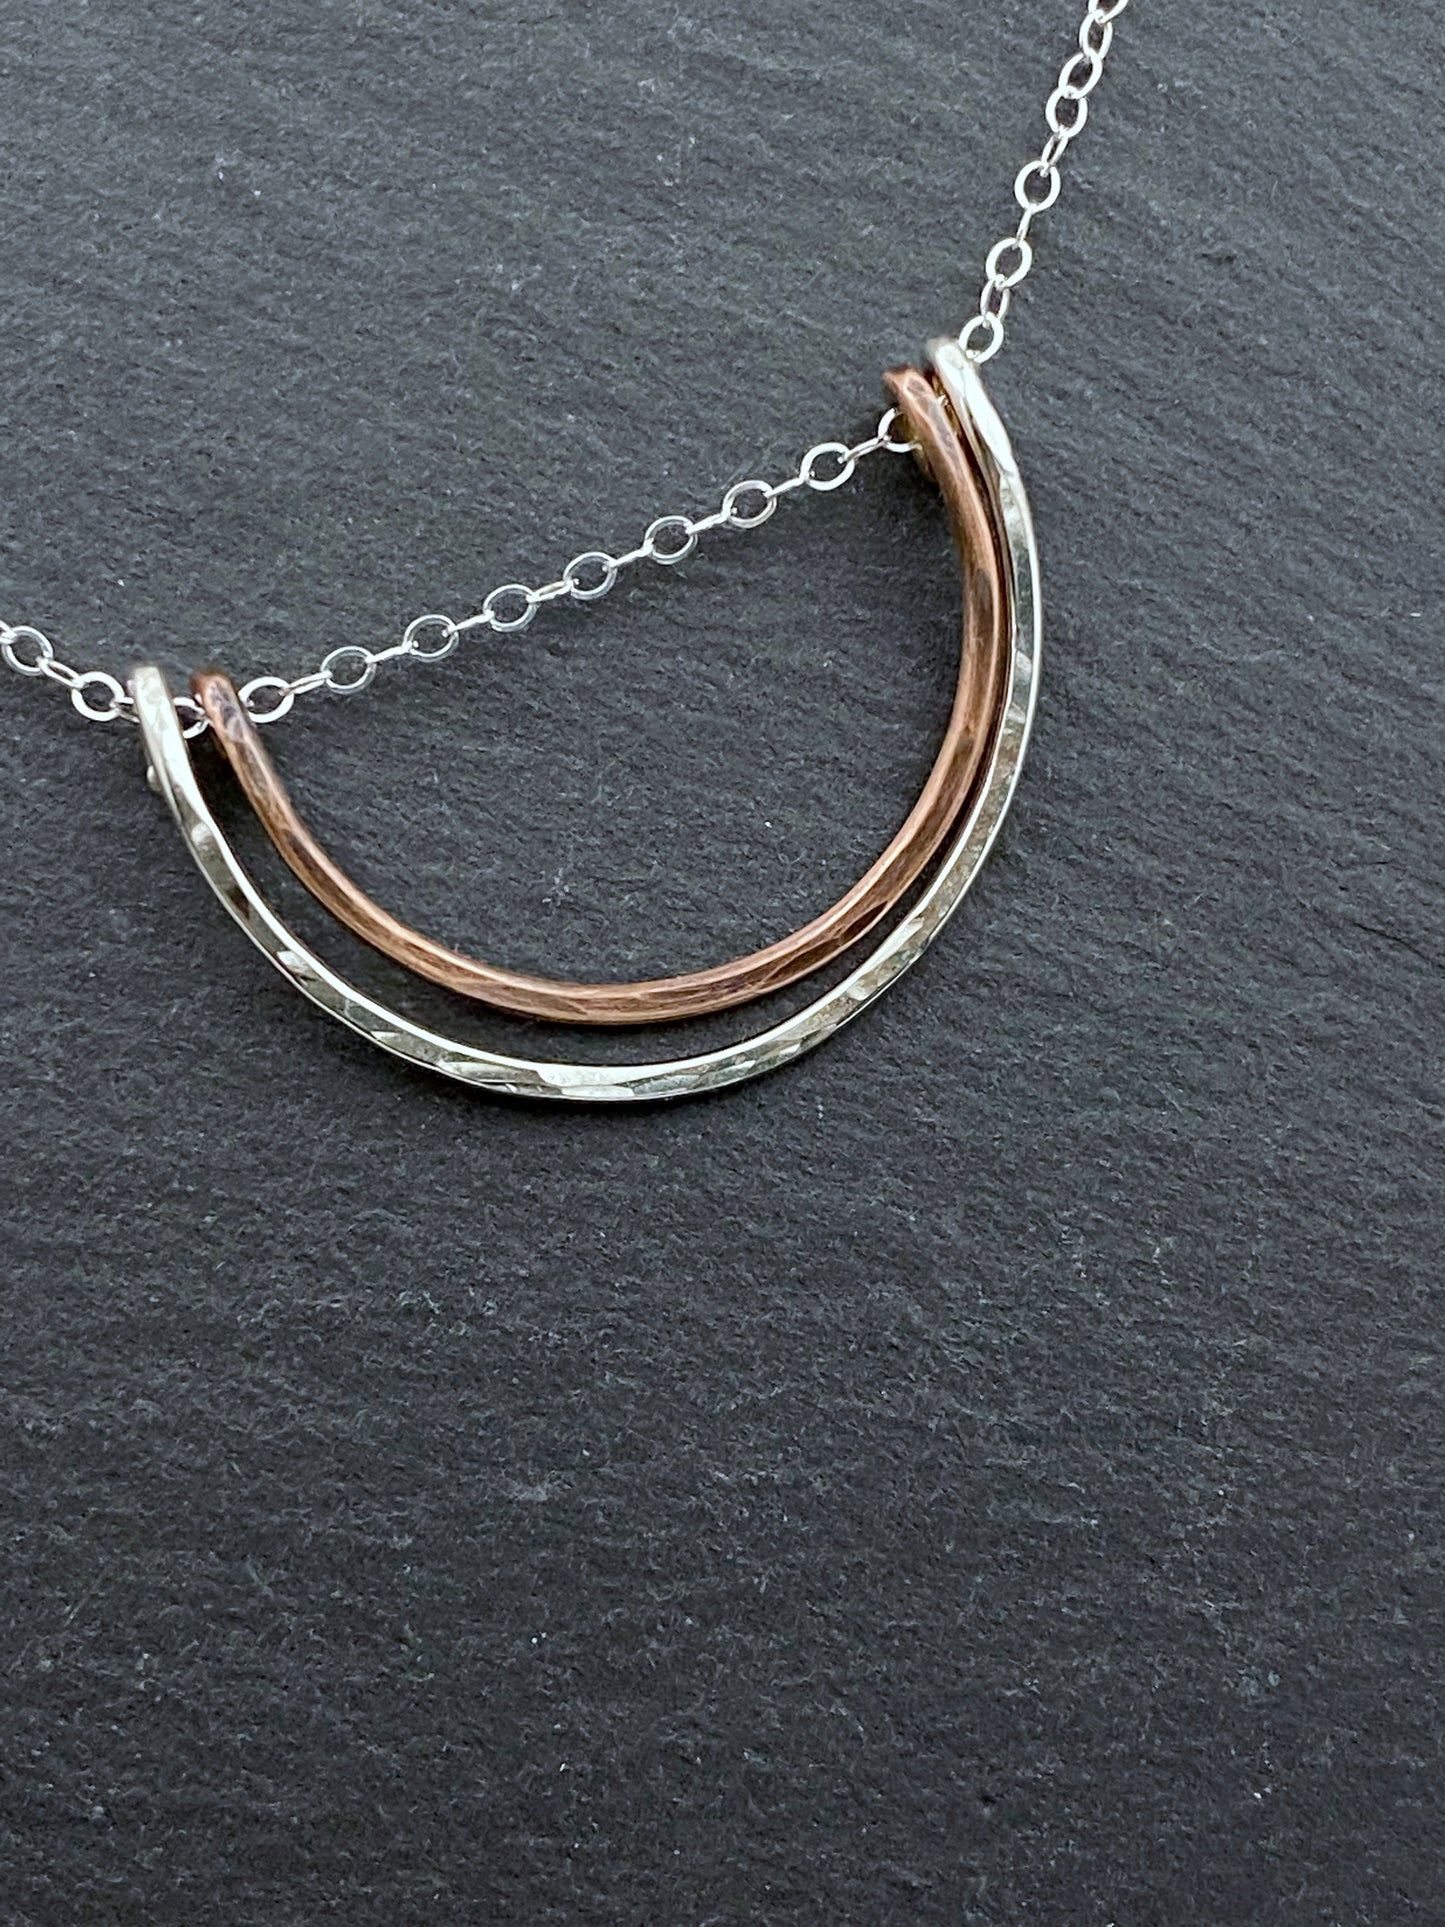 Forged sterling silver and copper wire half moon necklace